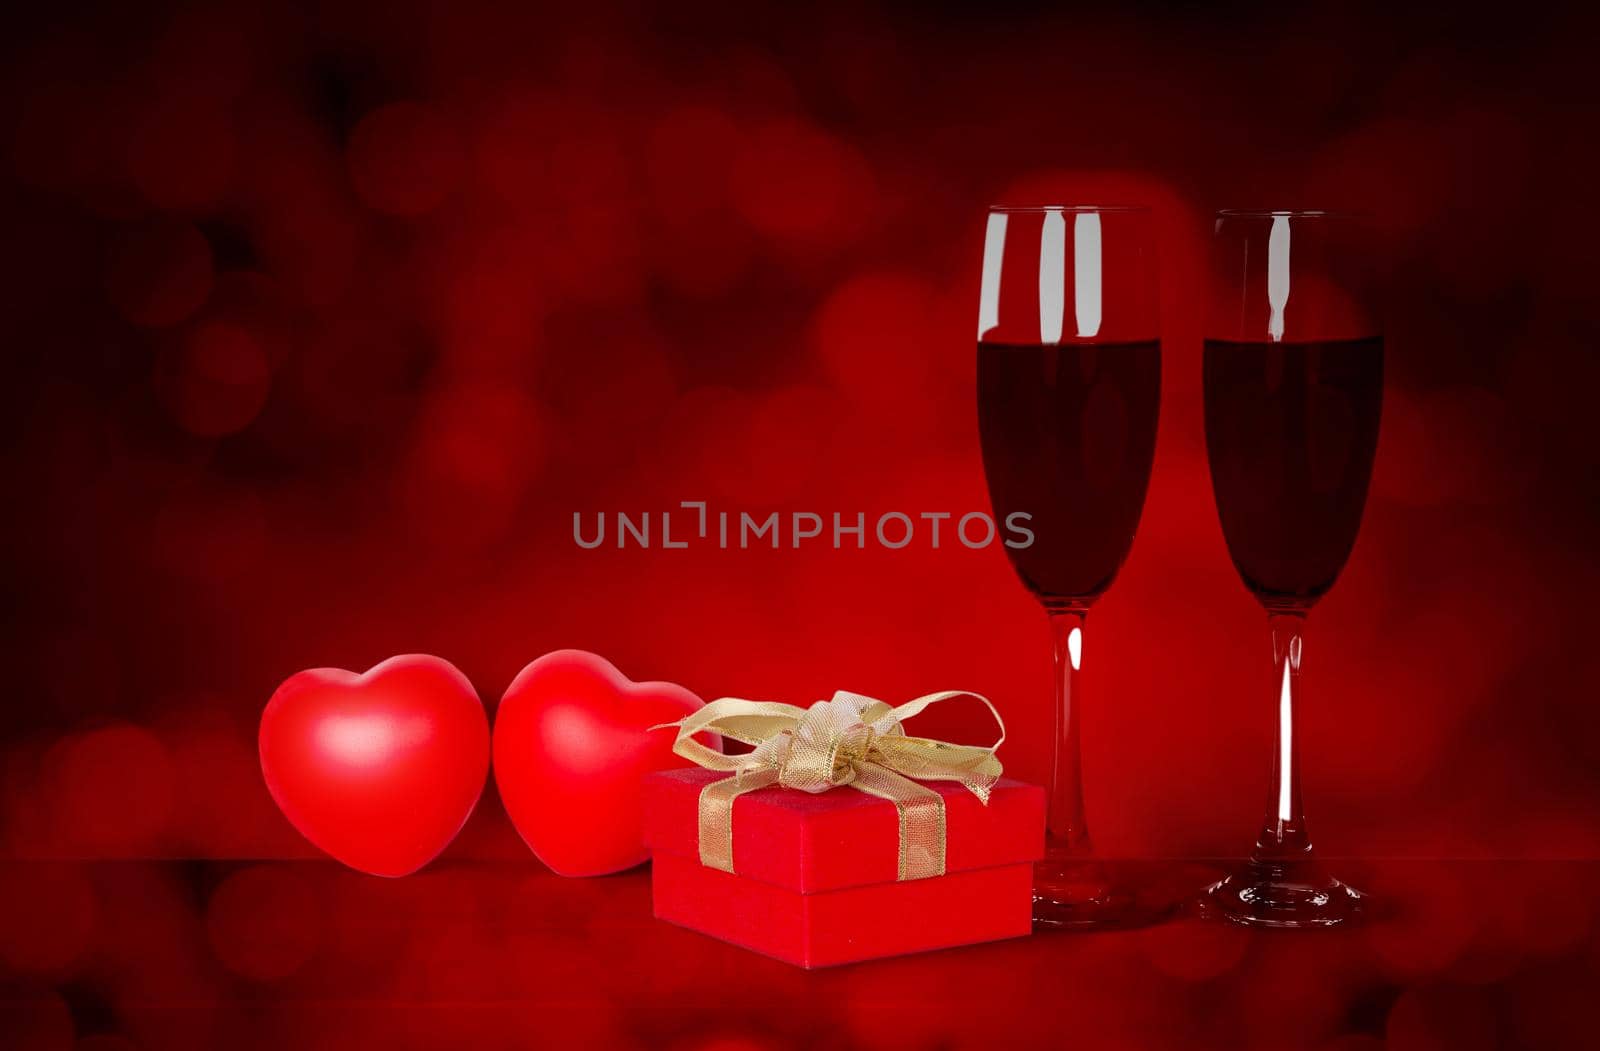 Two wineglasses and red gift box and heart shape on desk with red blur bokeh background, champagne glasses and presents with celebration and anniversary, love and romantic, valentine day concept.